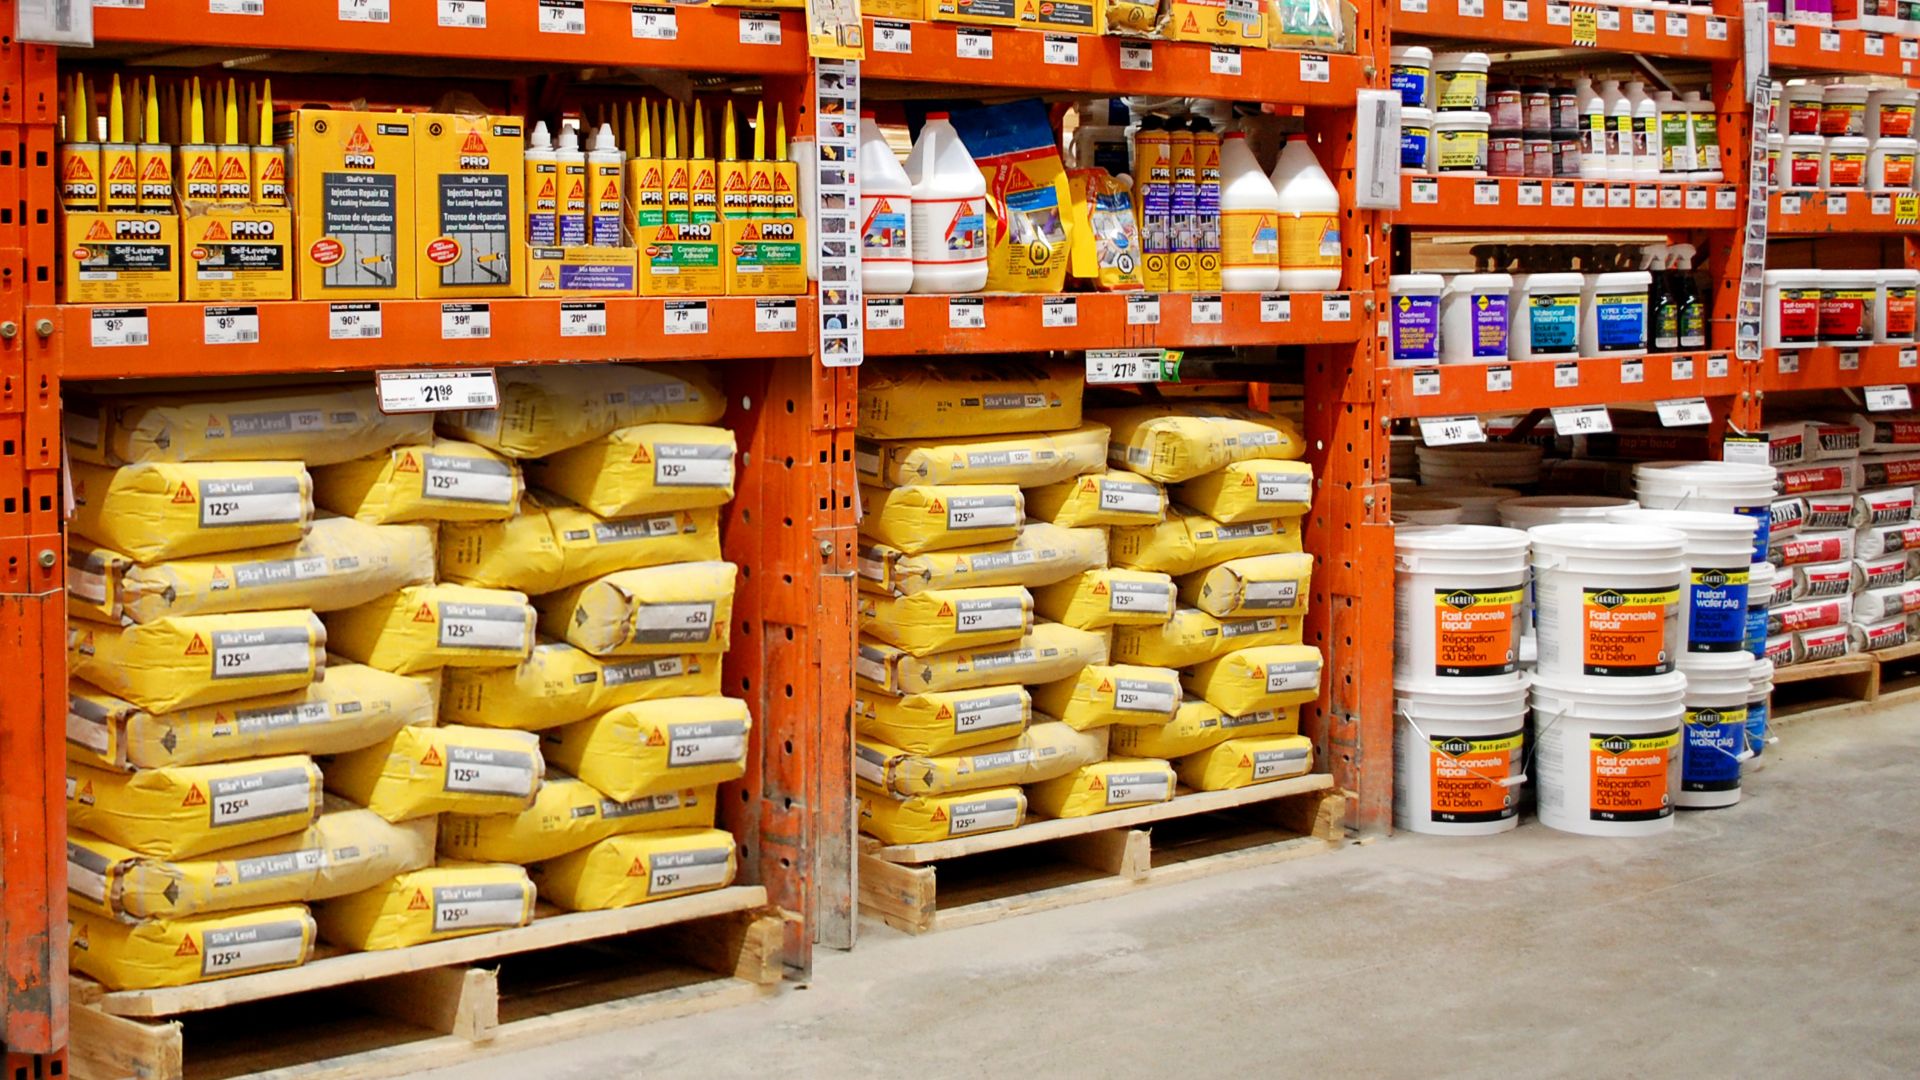 Sika shelf at King’s customer point of sales.